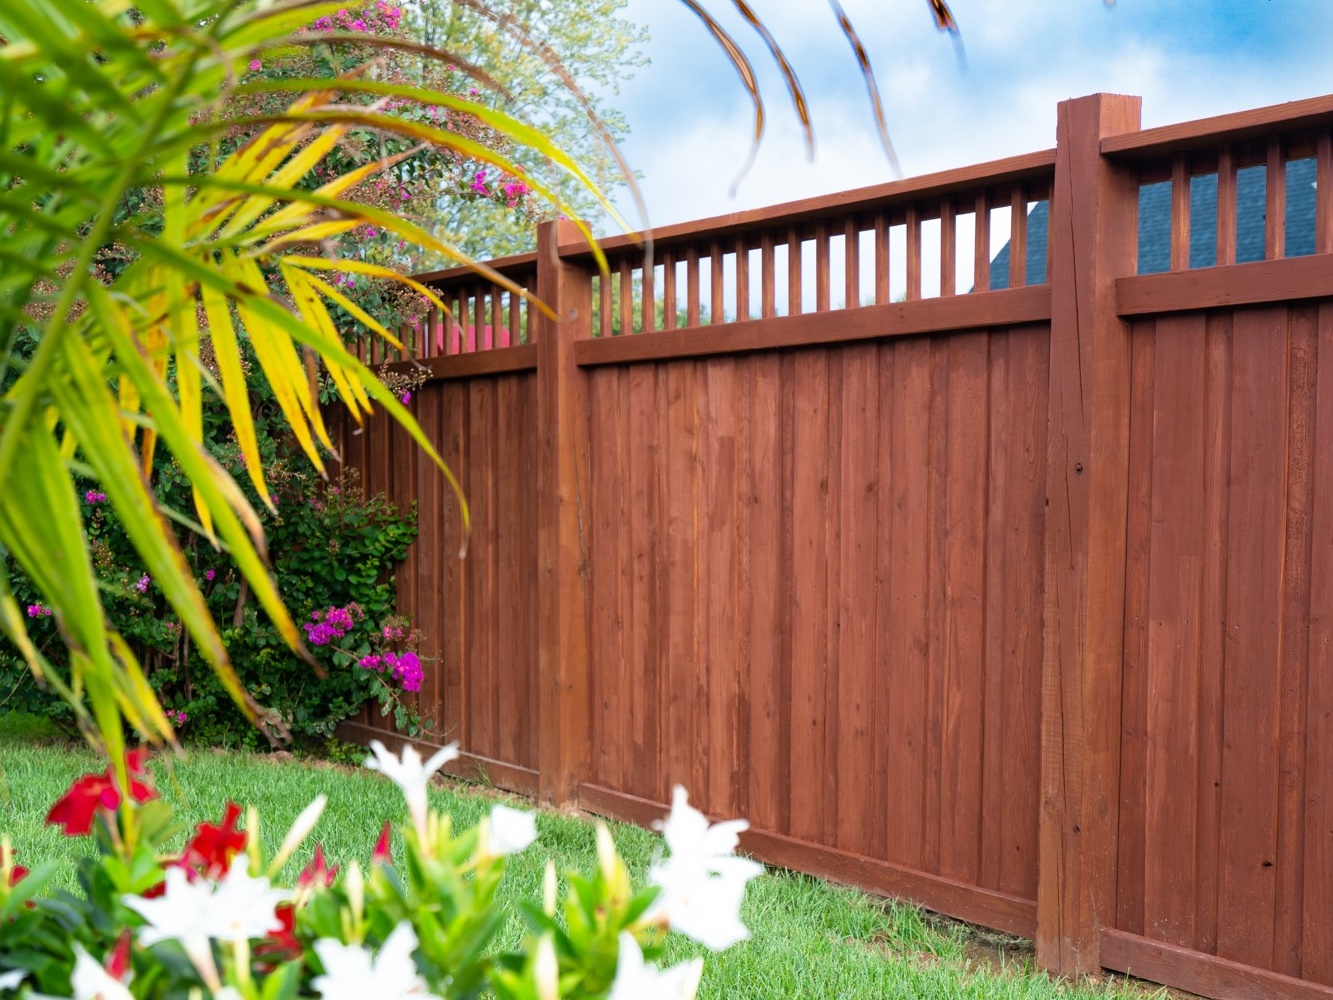 Crossville IL Spindle Top style wood fence